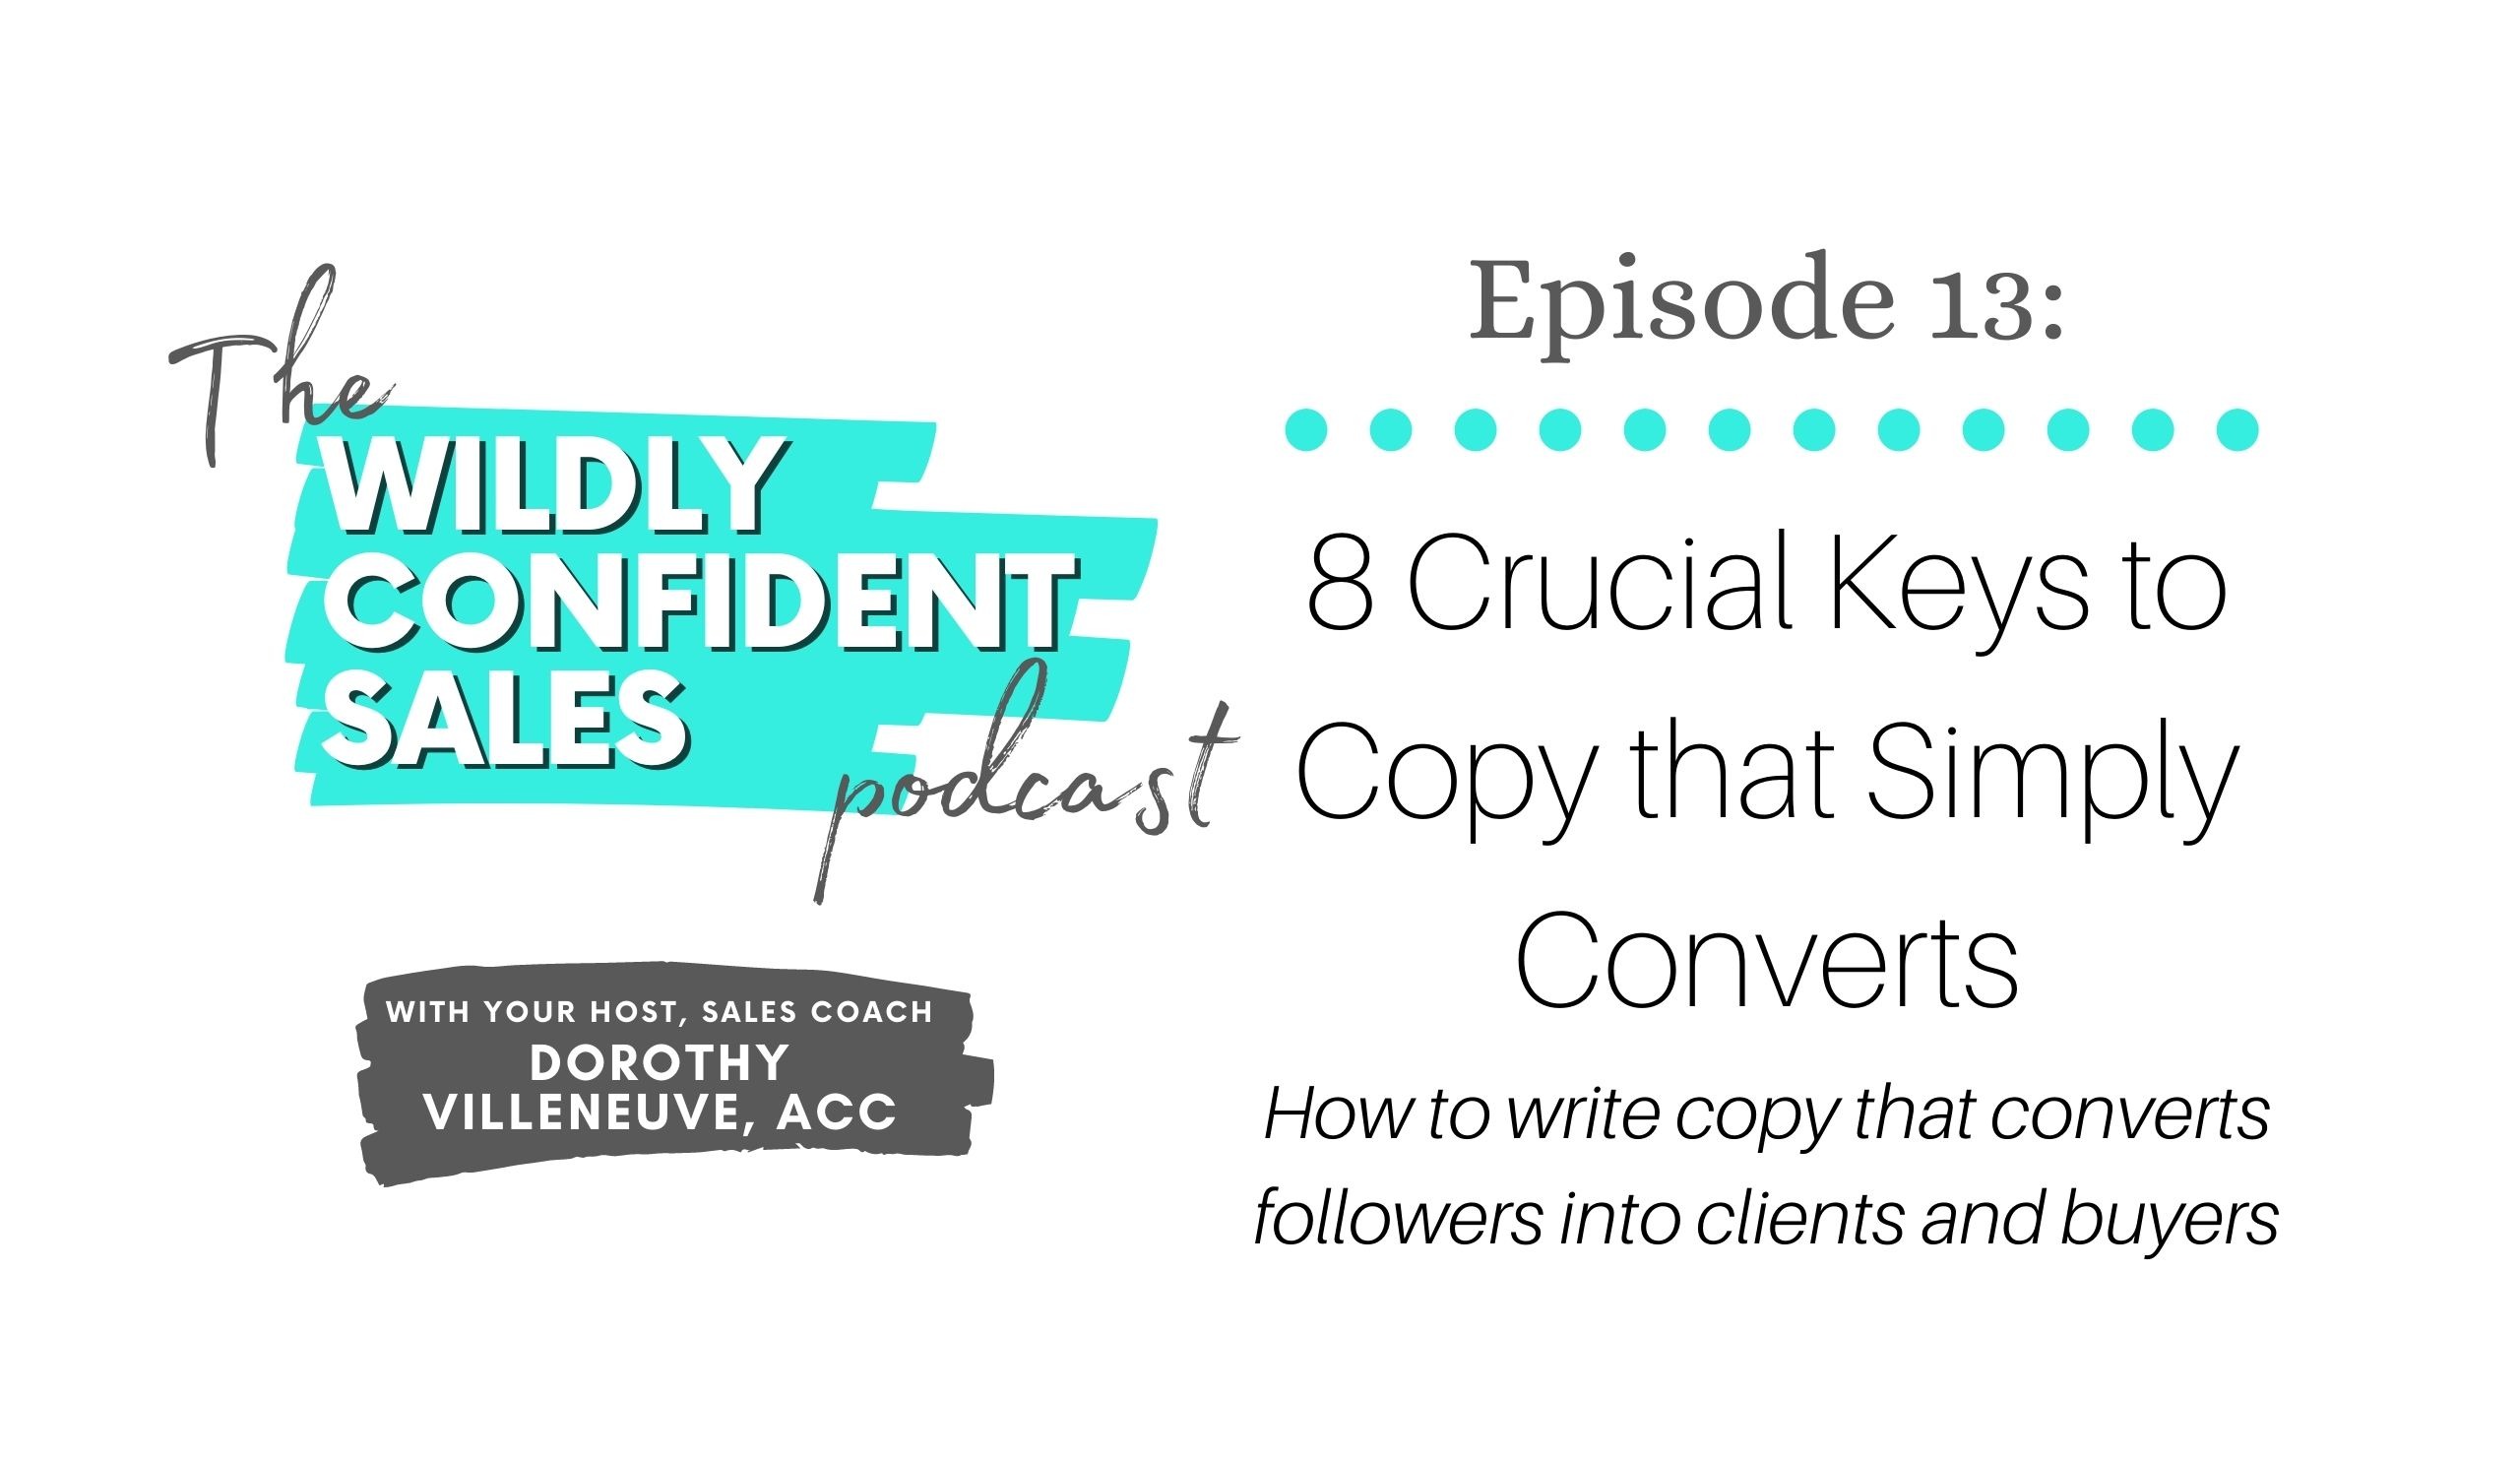 8 Crucial Keys to Copy that Simply Converts